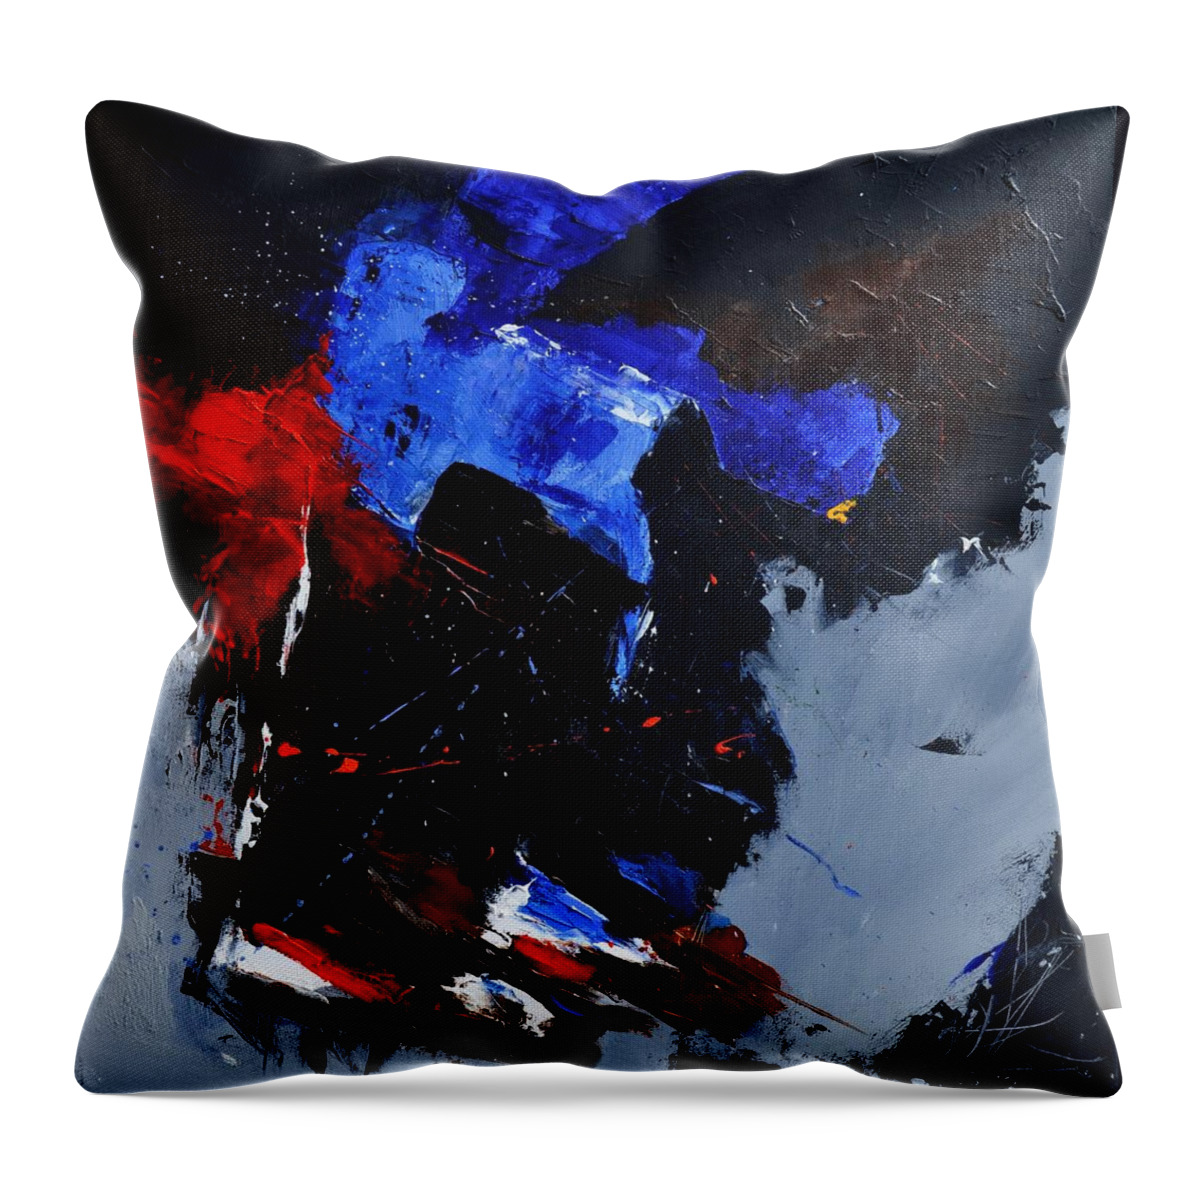 Abstract Throw Pillow featuring the painting Abstract 8811501 by Pol Ledent